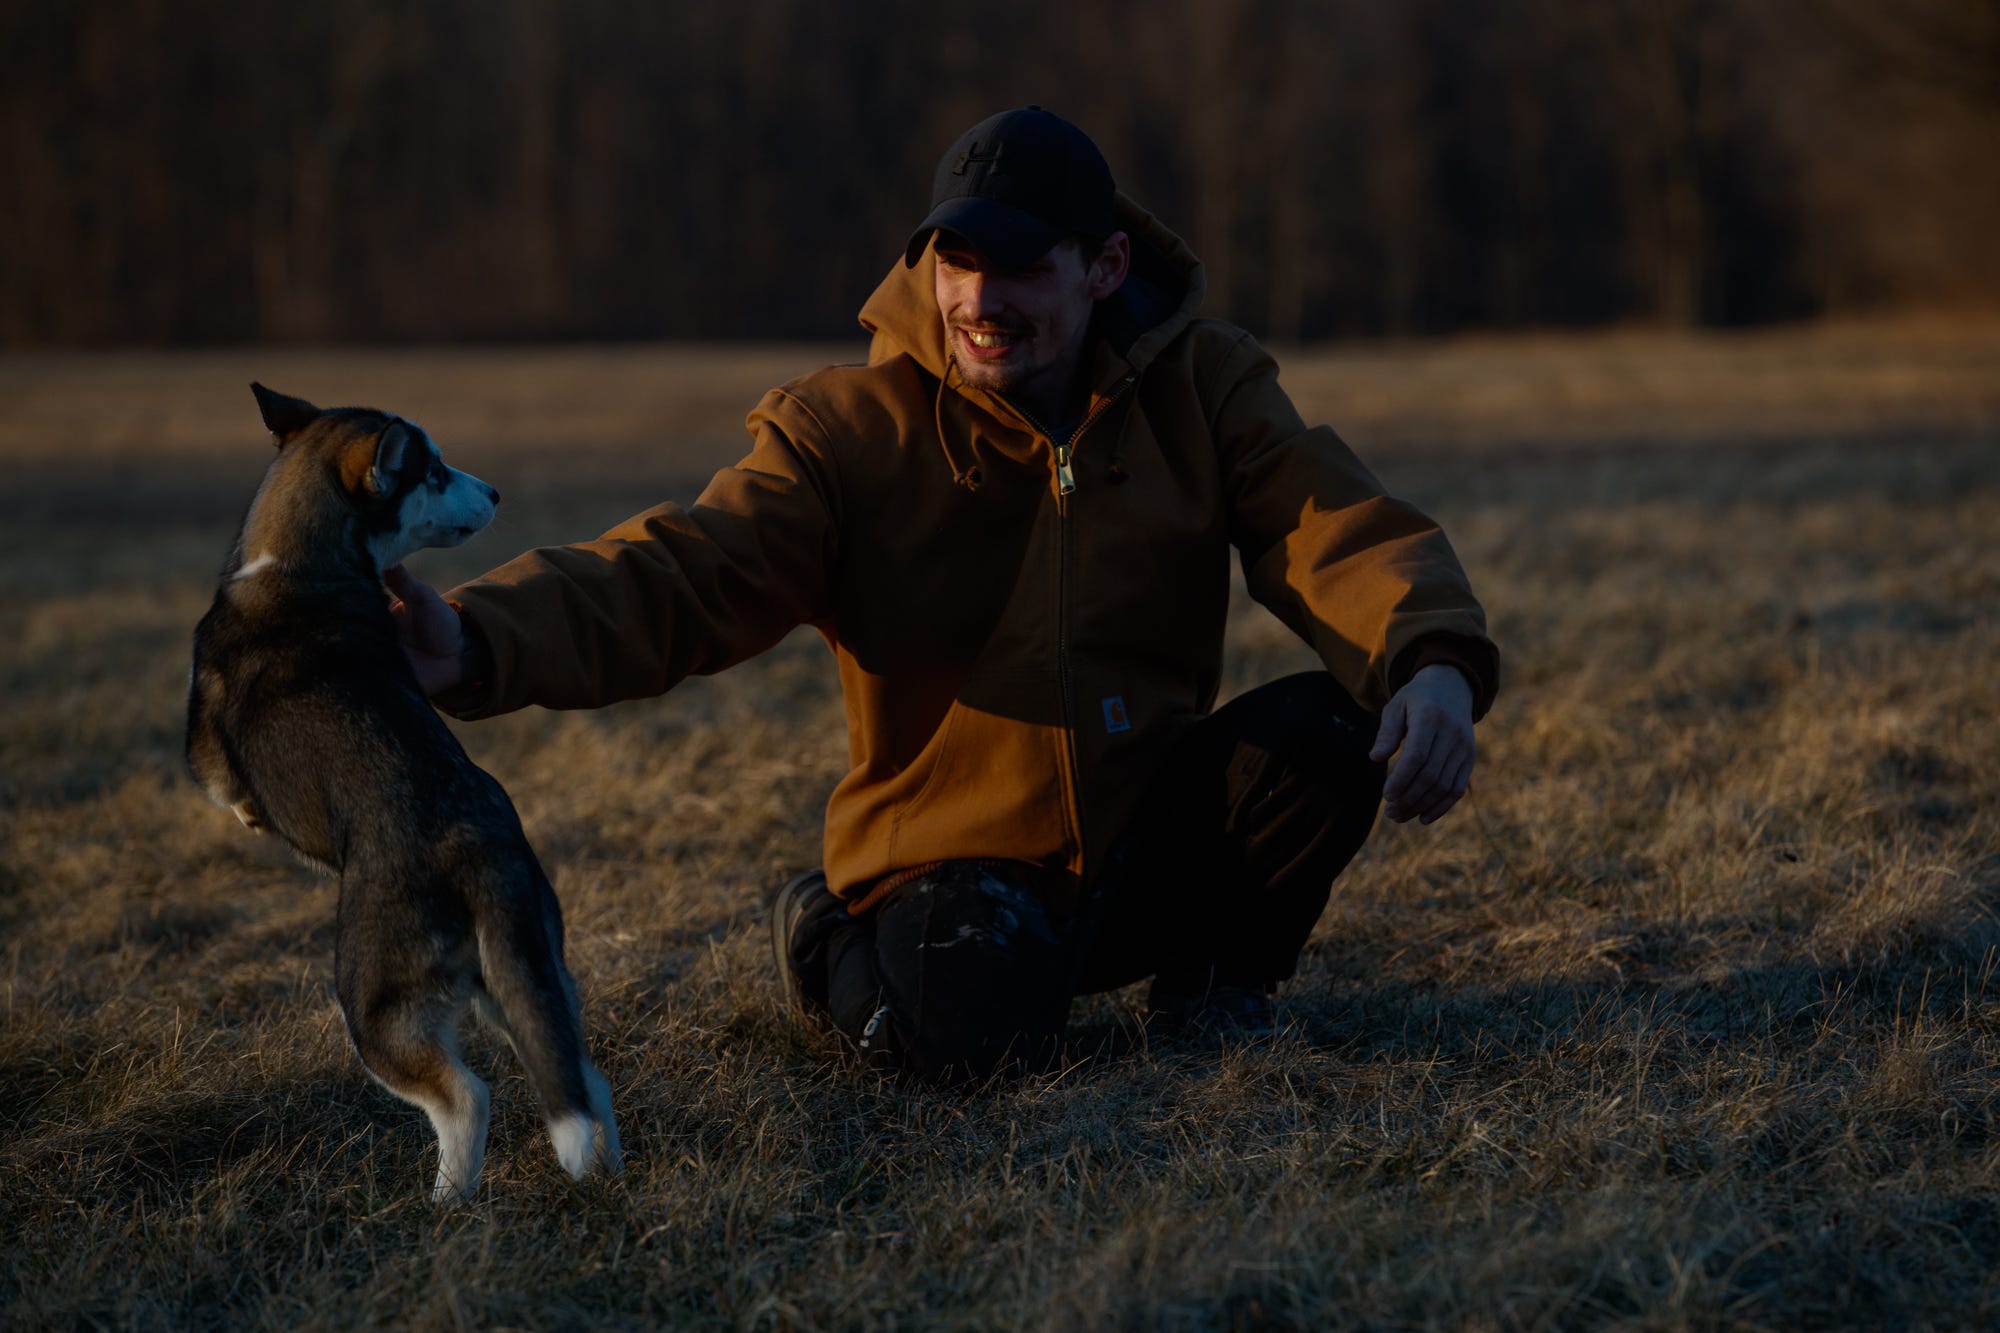 Tanner McAfee plays with his puppy Meekah earlier this year in a field near his home just over the Indiana border in Michigan. He worked in the RV industry for 10 years, saving to buy a home and have land. "She is absolutely therapeutic," McAfee said. "When I have a dog so excited when I come home, there's no better joy in the world. Her being happy makes me happy."